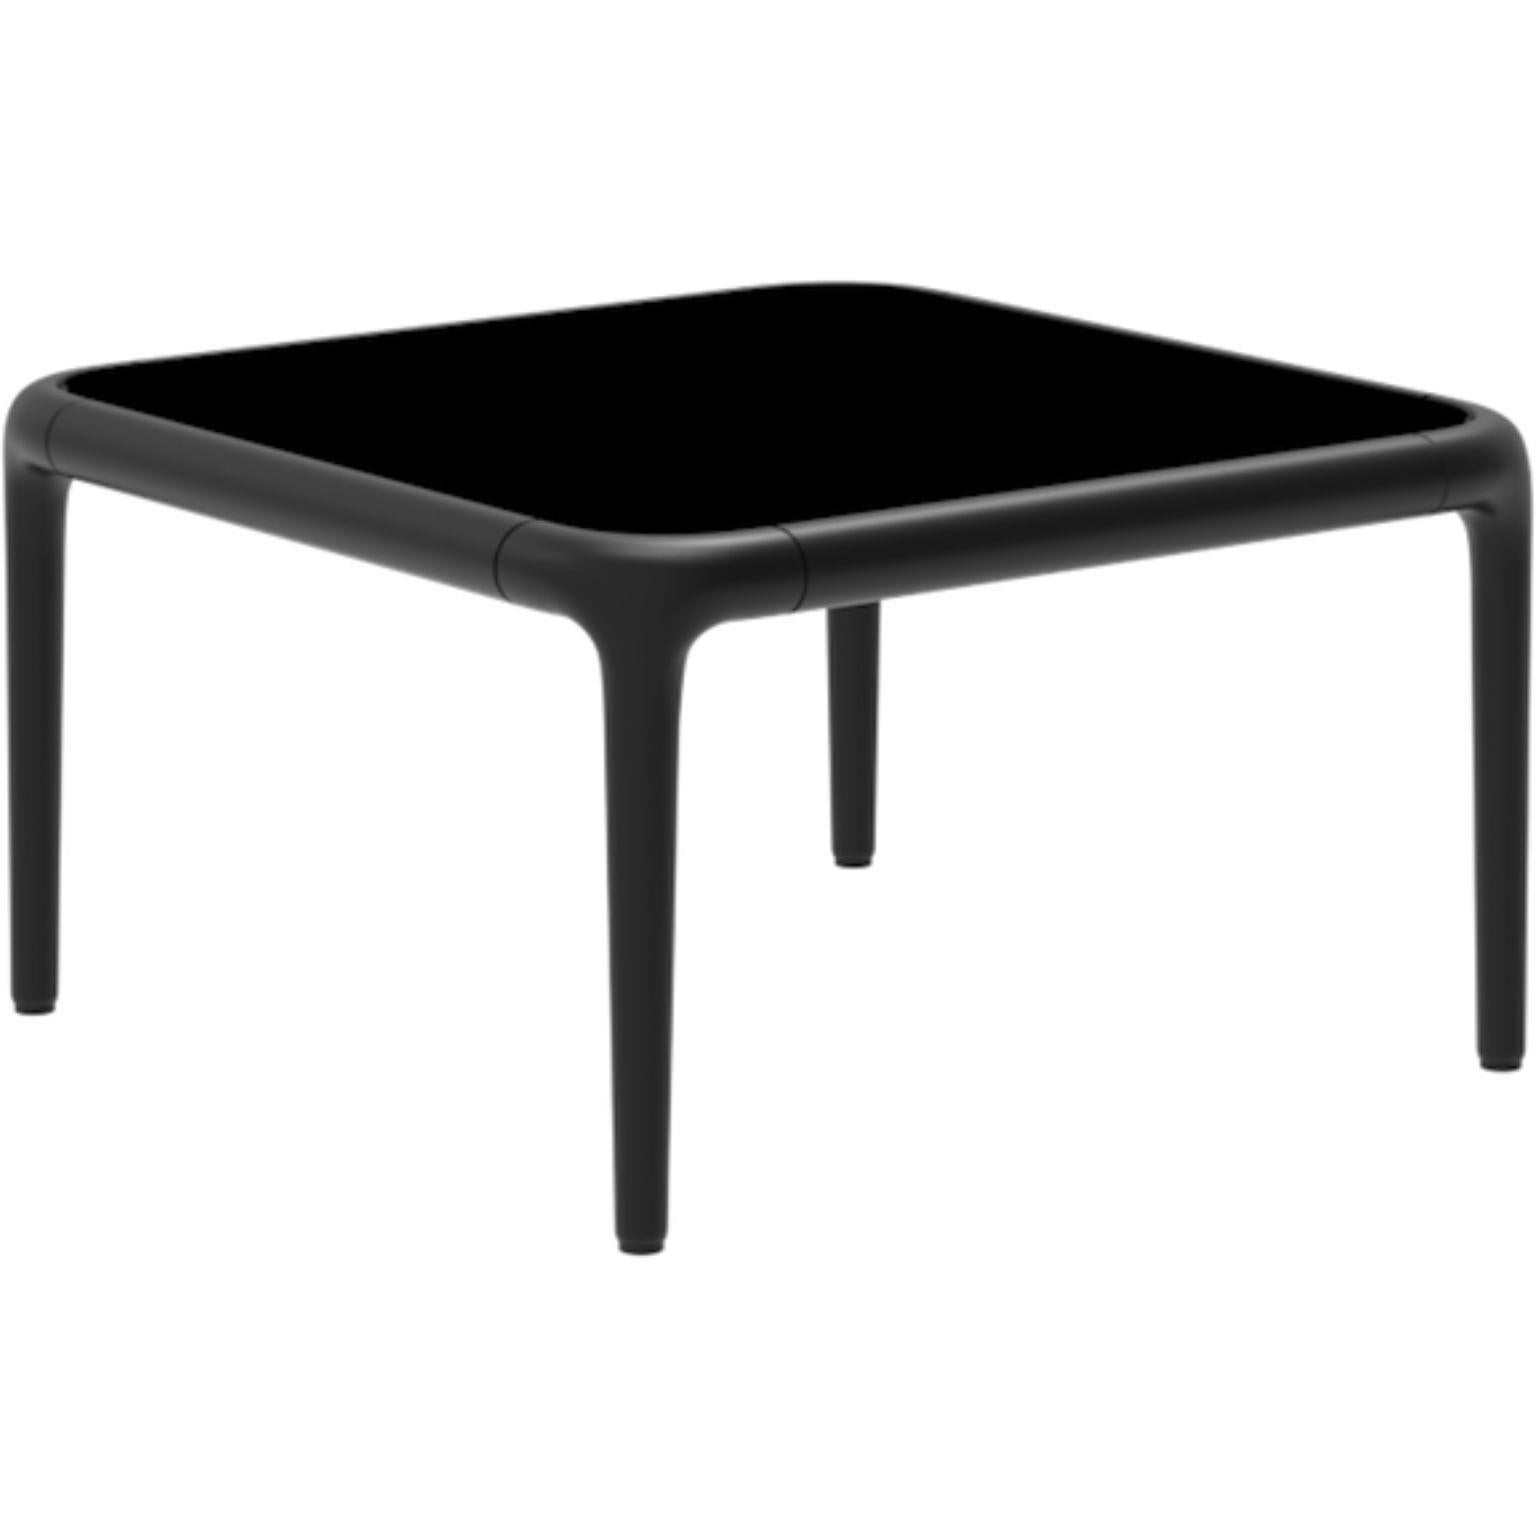 Xaloc black coffee table 50 with glass top by Mowee.
Dimensions: D50 x W50 x H28 cm
Materials: Aluminum, tinted tempered glass top.
Also available in different aluminum colors and finishes (HPL Black Edge or Neolith).

Xaloc synthesizes the